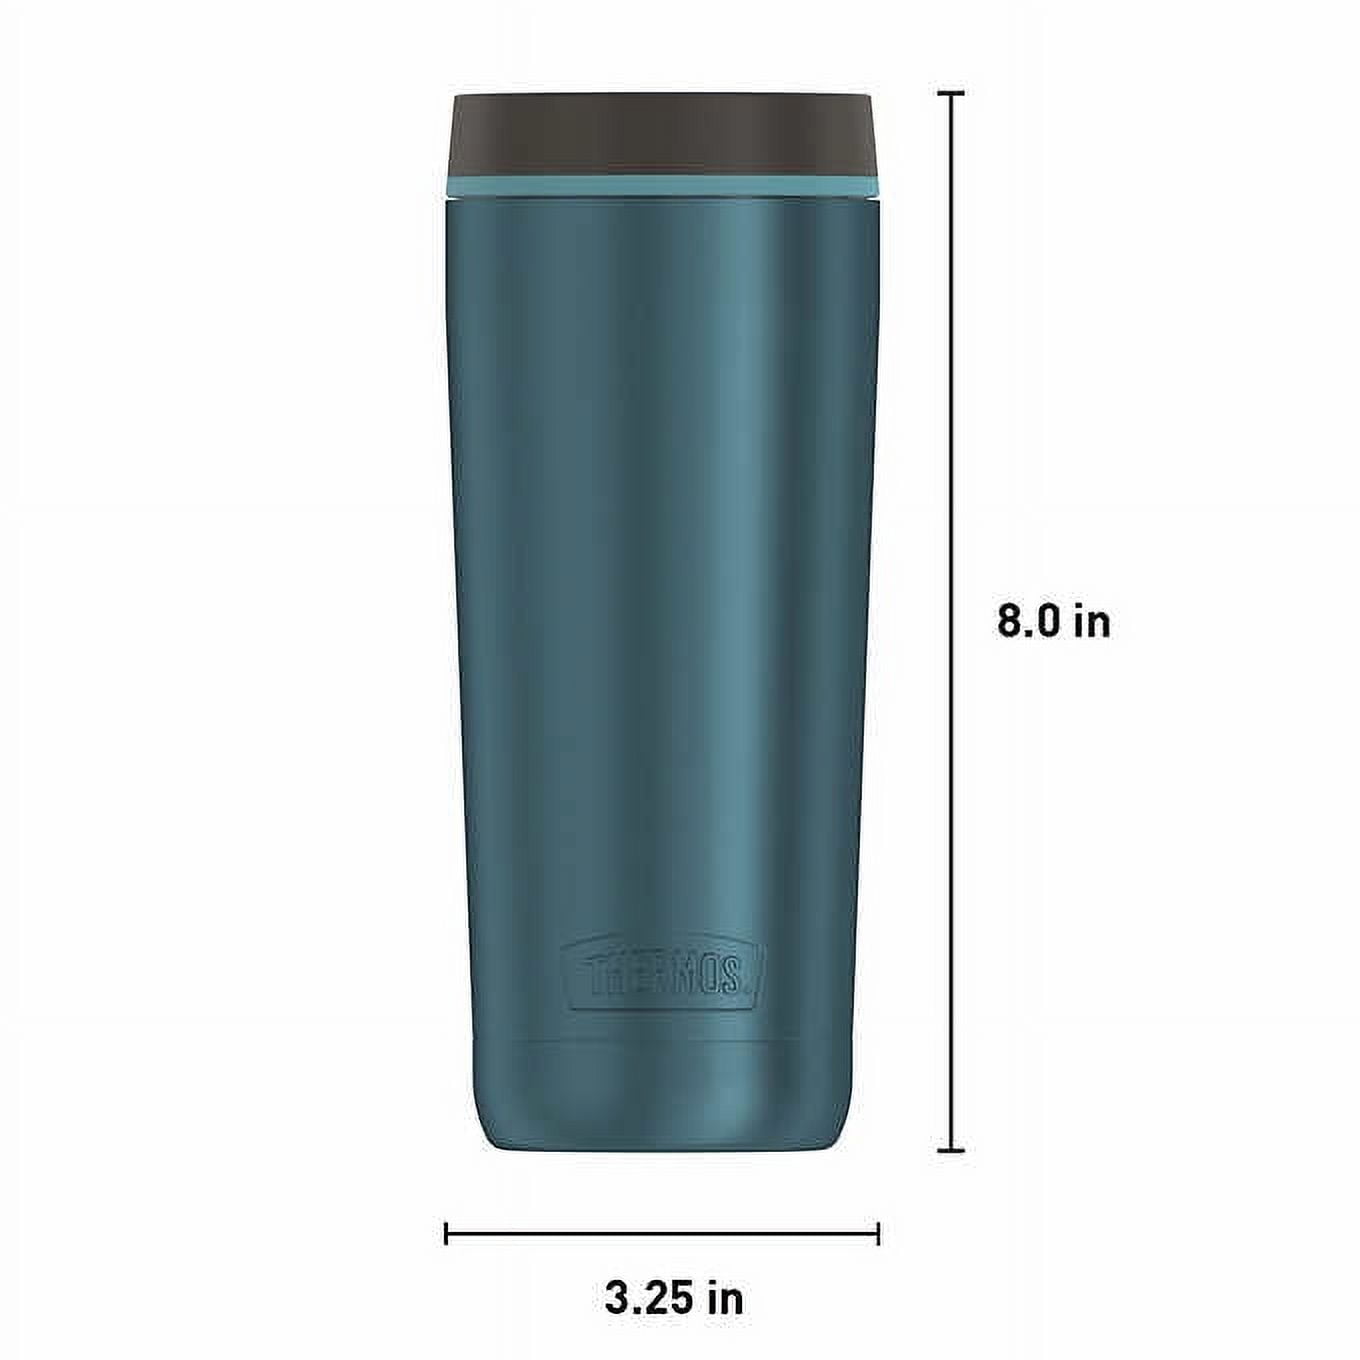 Thermos Stainless Steel 18oz Travel Tumbler, 2-pack – Zippy's